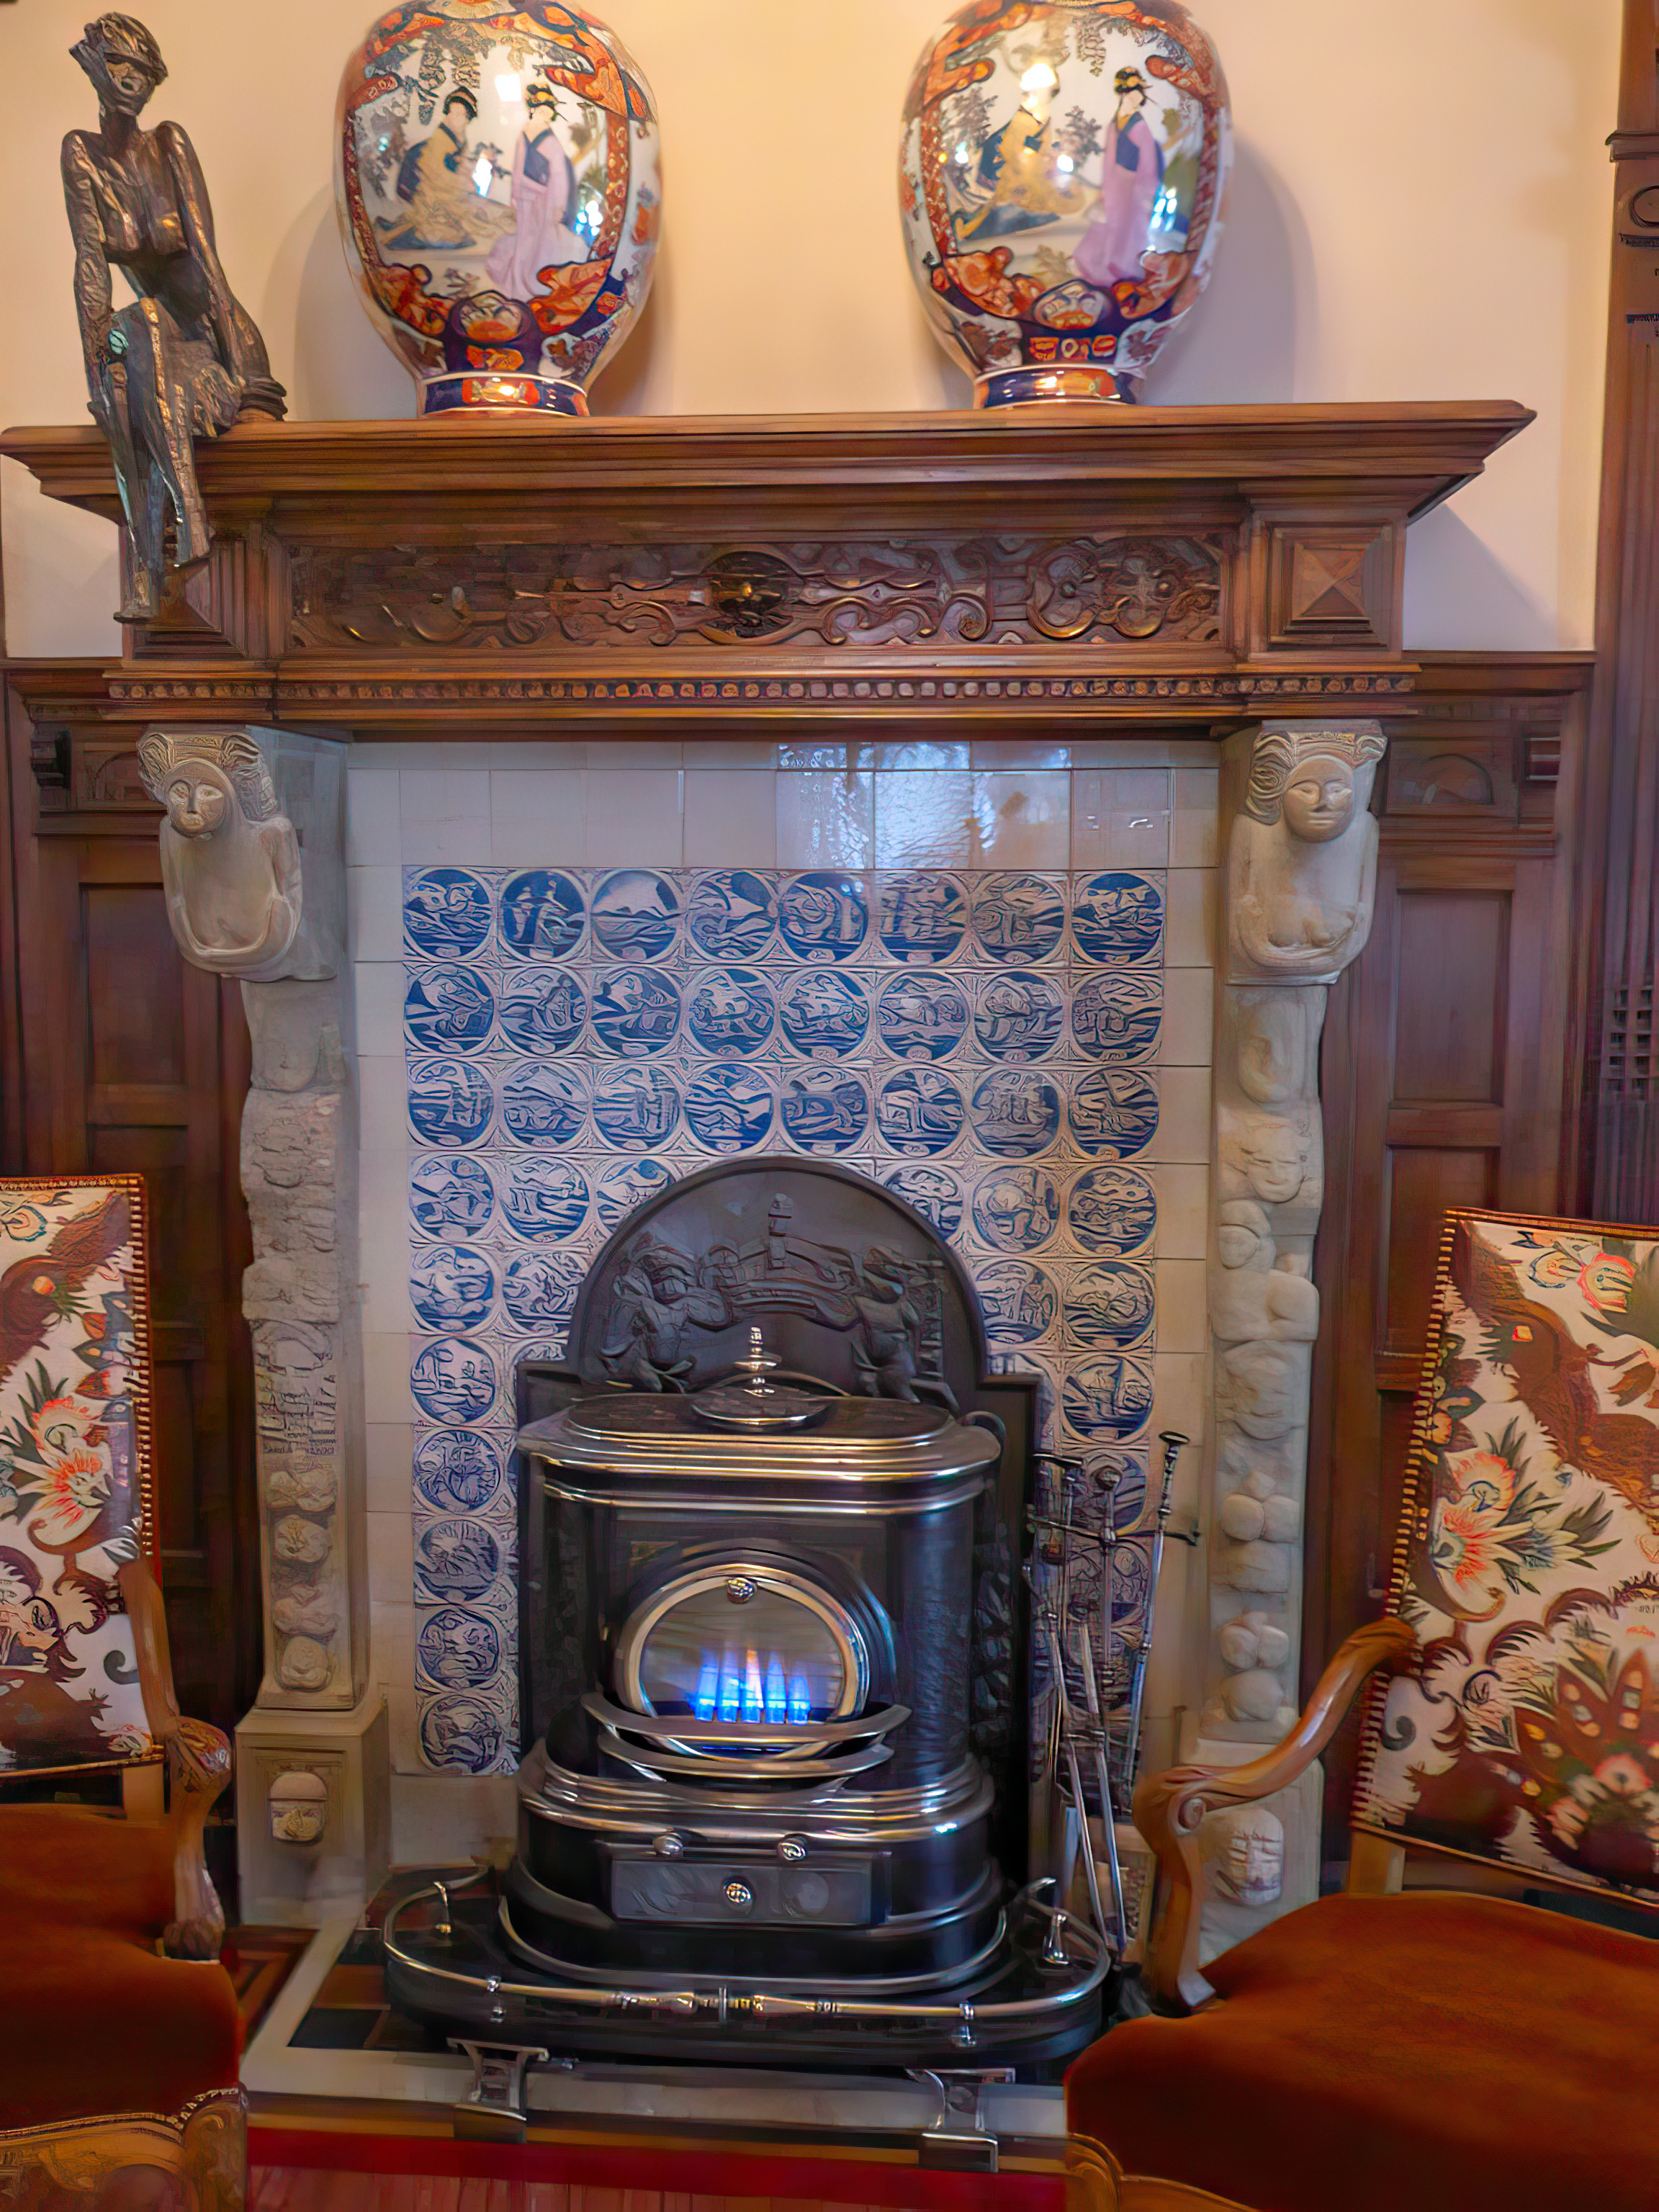 Antique stove with a fireback as heat shield in front of a tile wall